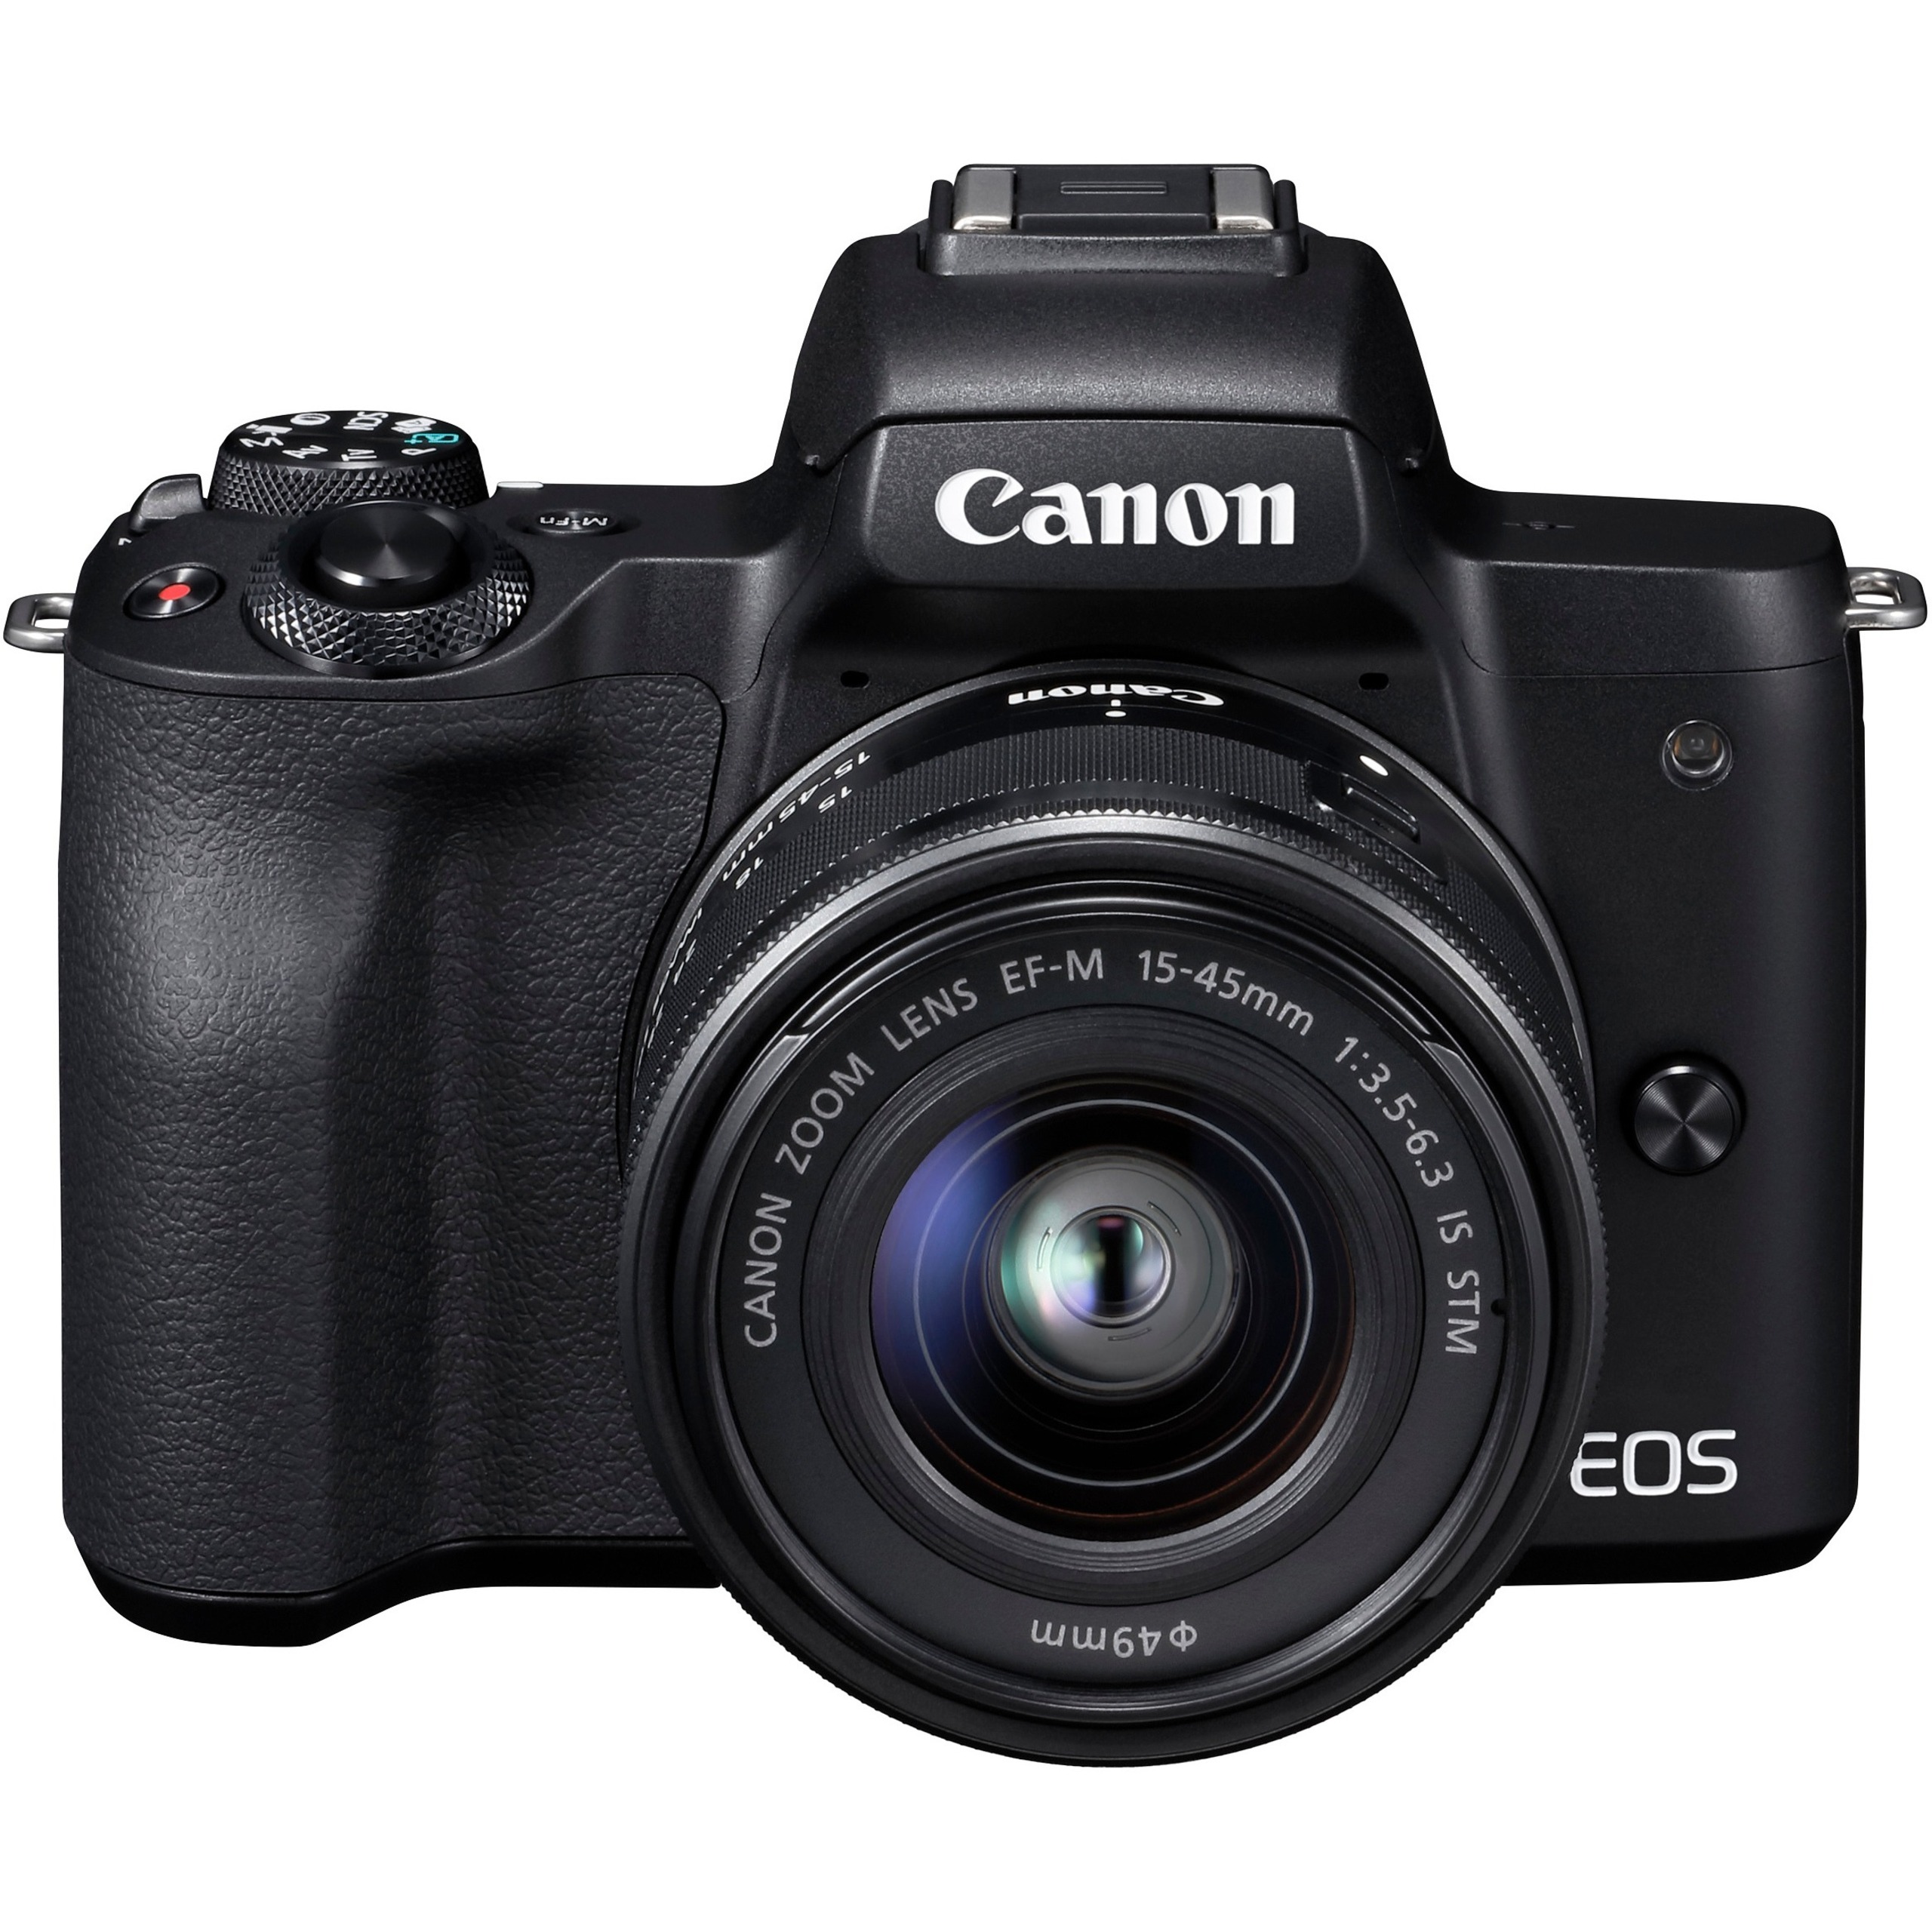 Canon EOS M50 24.1 Megapixel Mirrorless Camera with Lens, 0.59", 1.77", Black - image 3 of 11